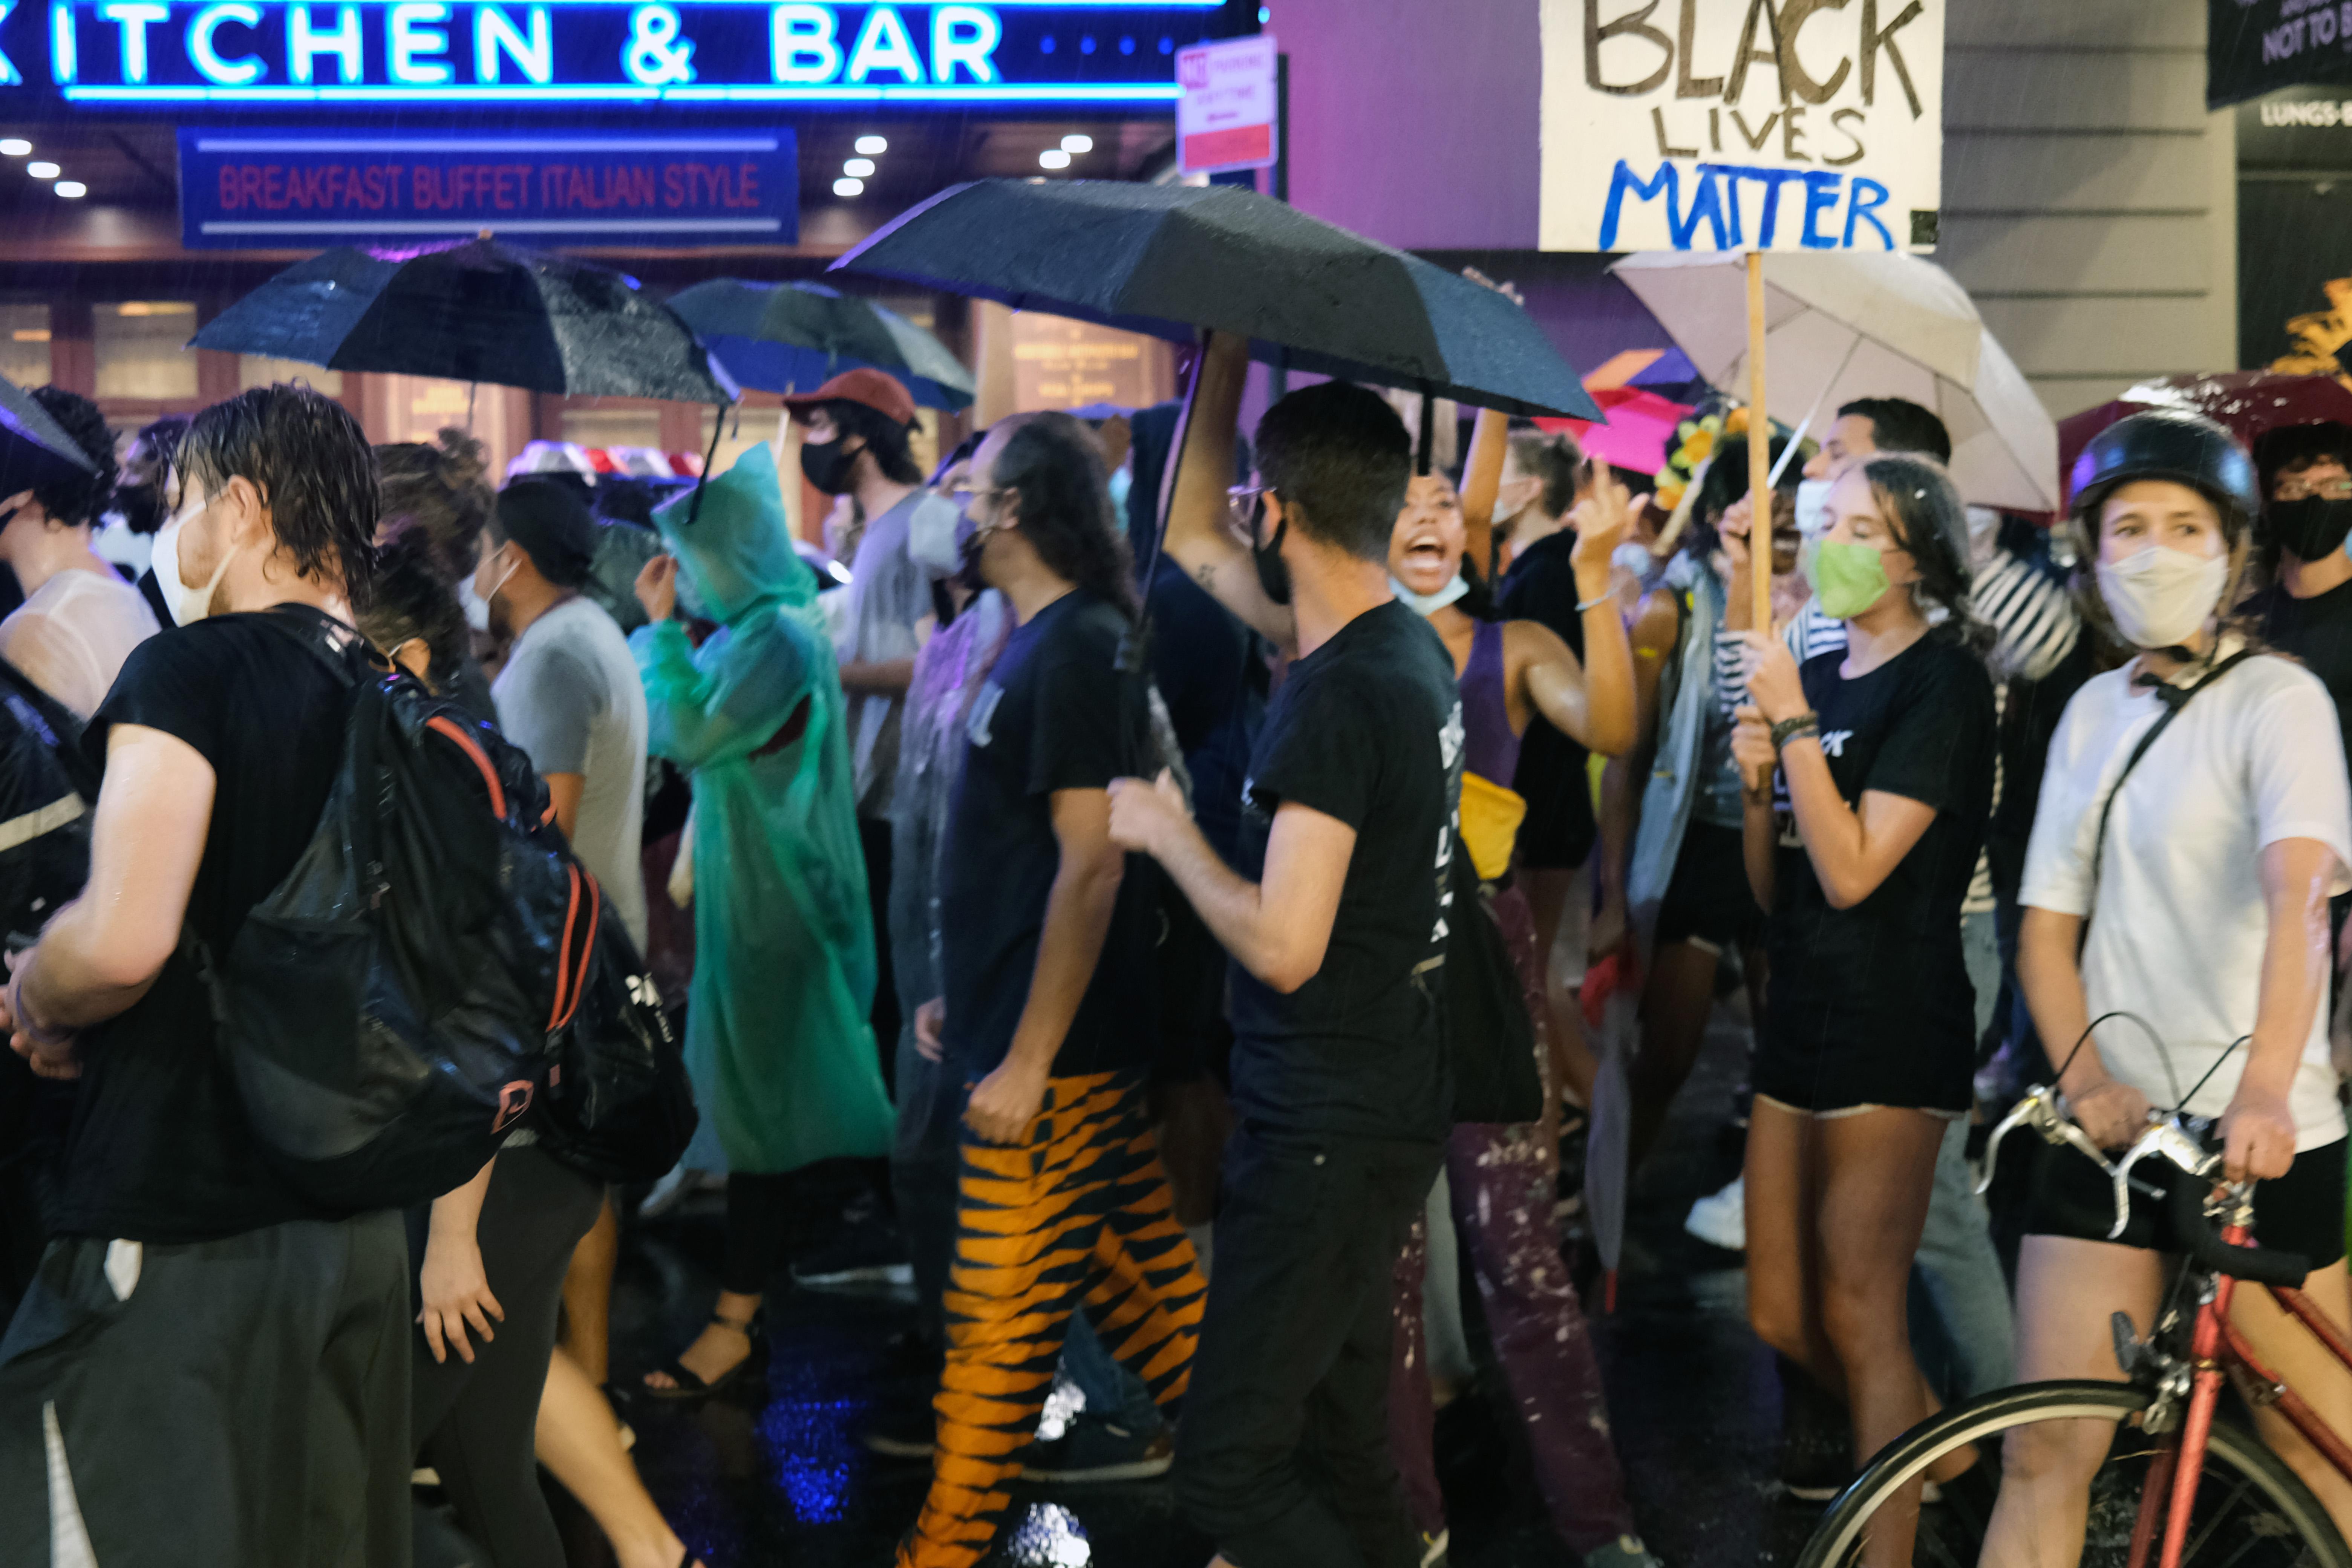 People carrying umbrellas and signs march in the rain in a protest.